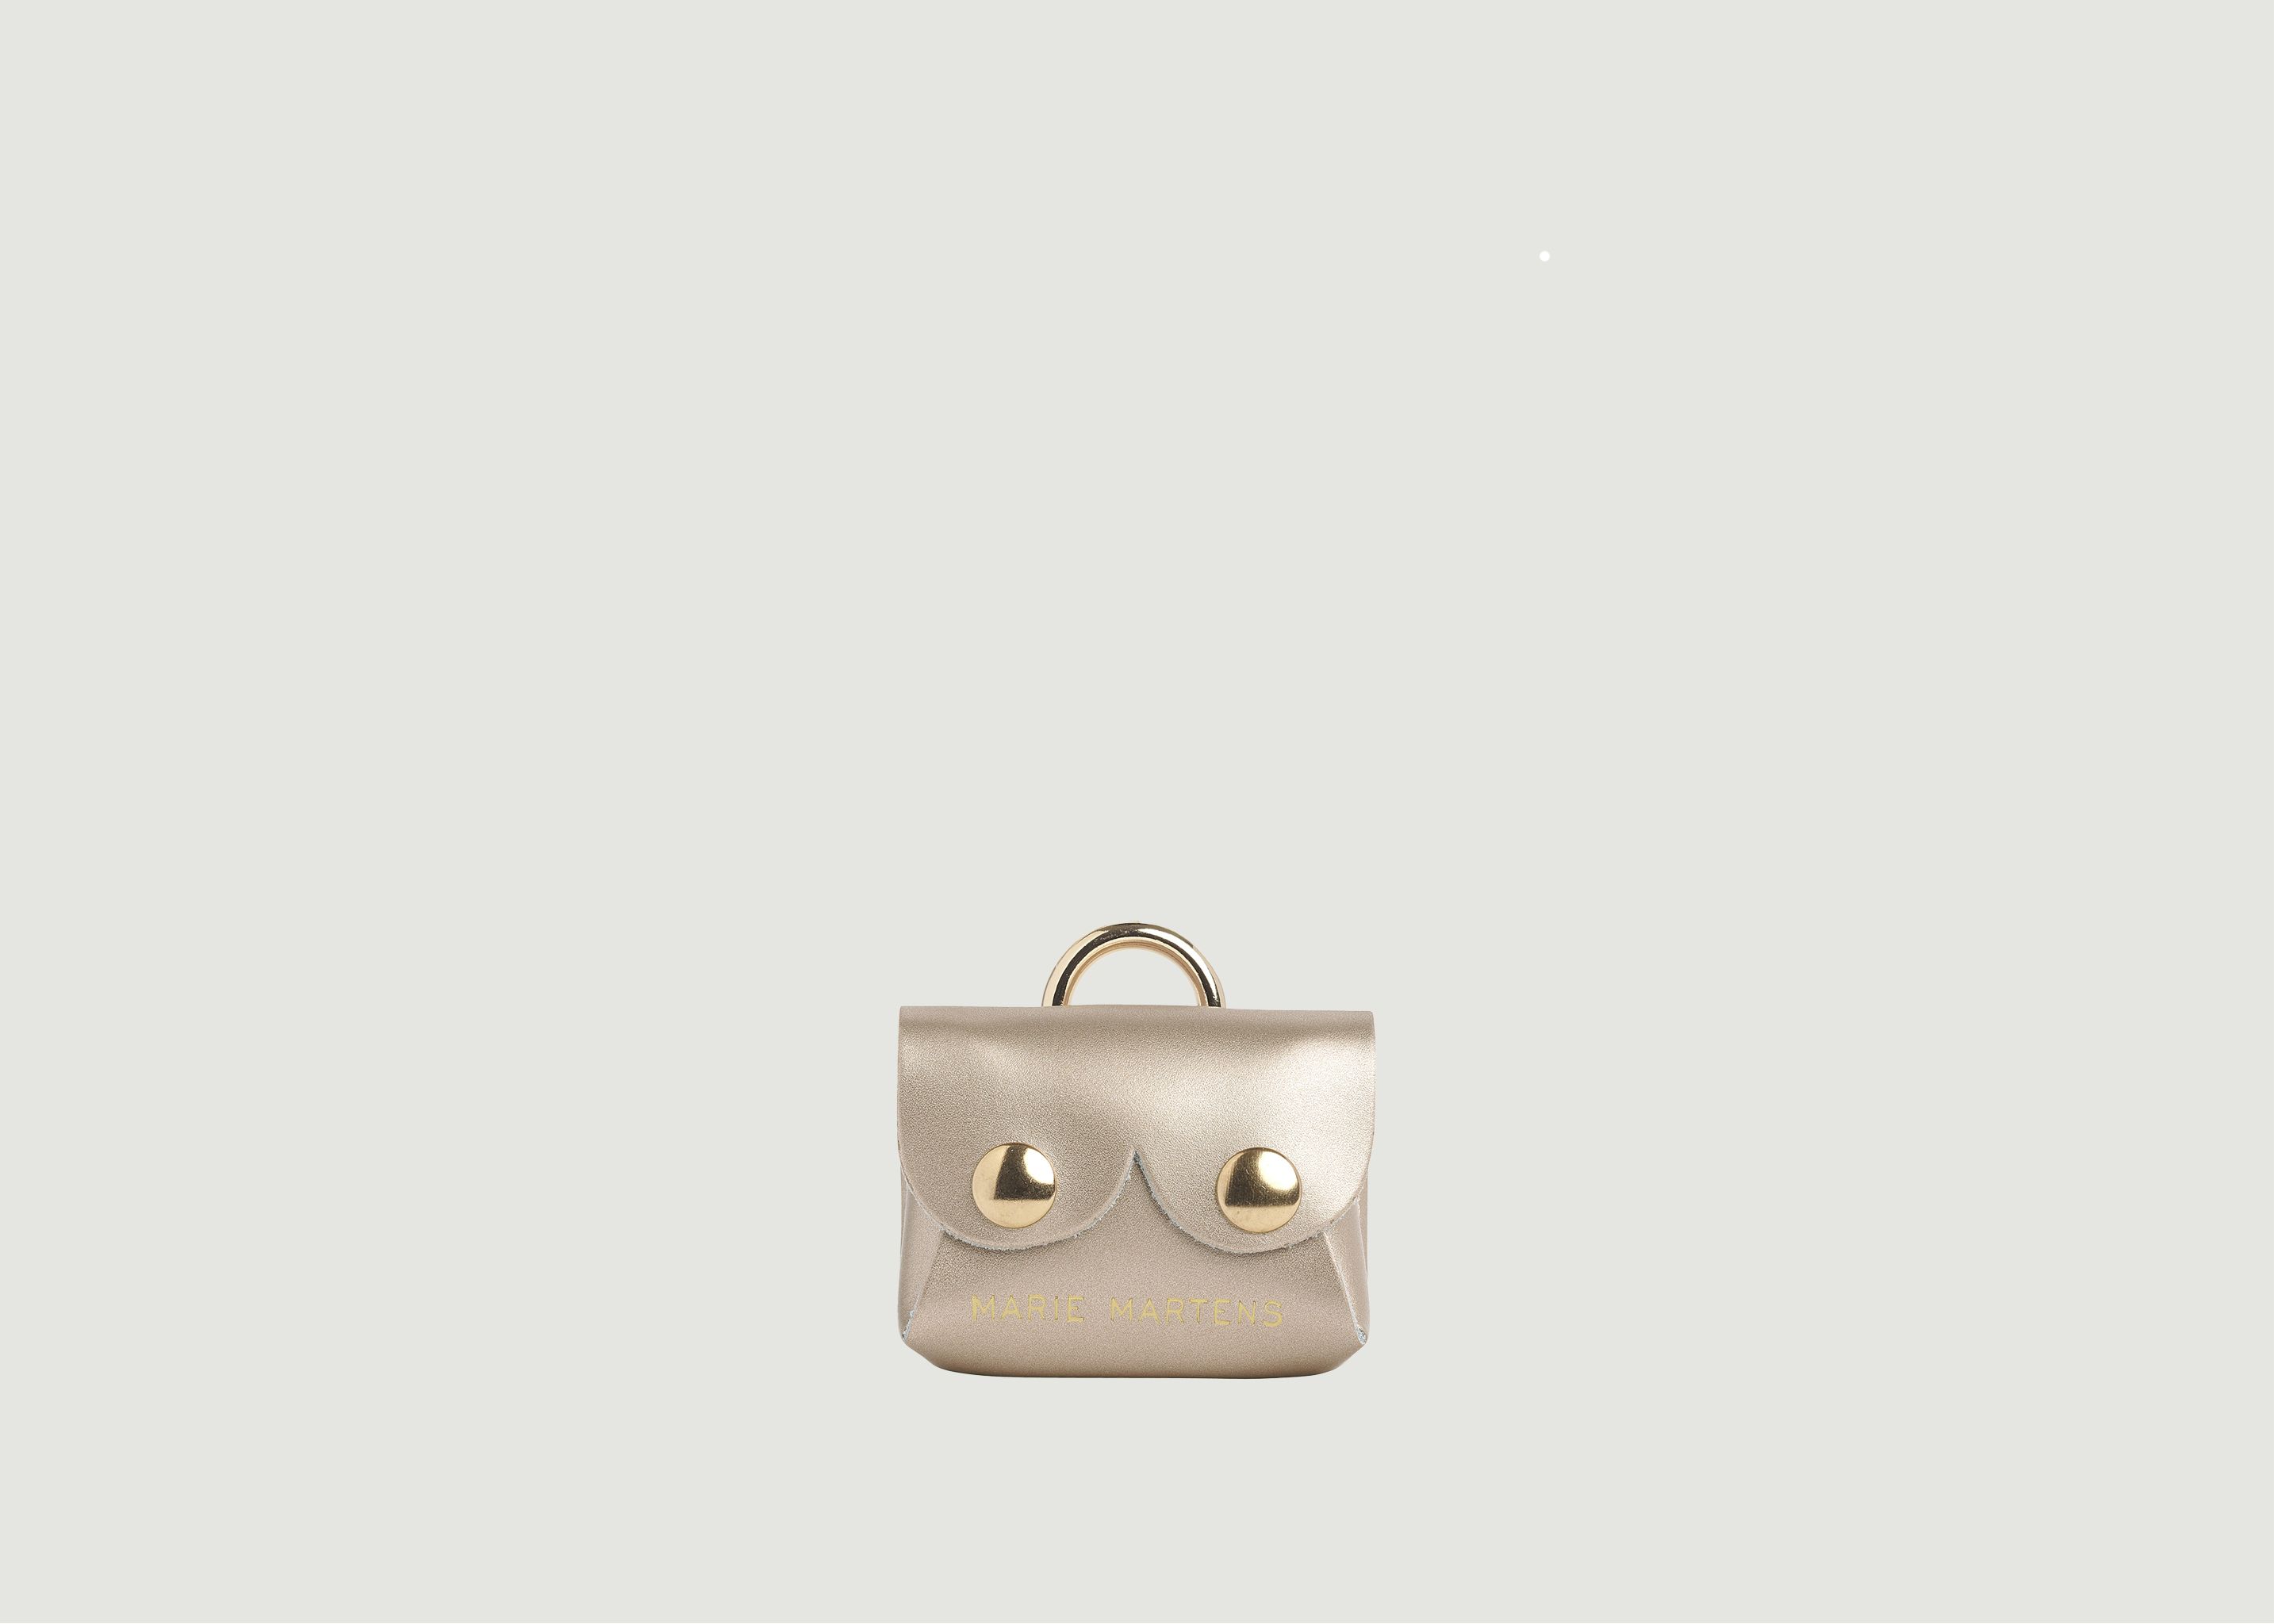 Airpods case or Choupy purse - Marie Martens